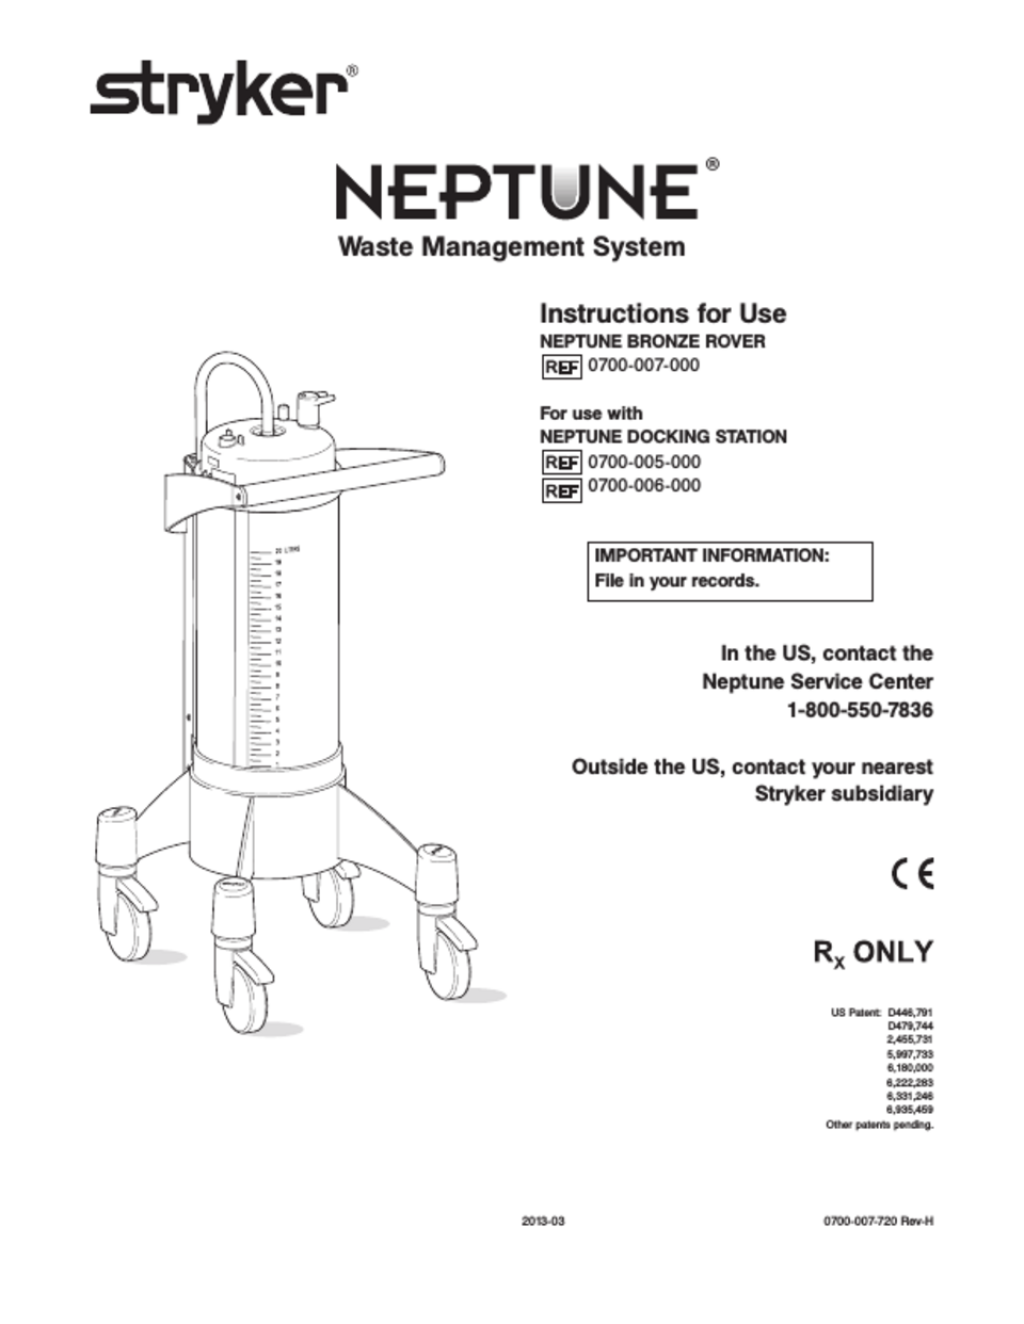 Picture of: NEPTUNE Bronze Rover Instruction for Use Rev H PDF download